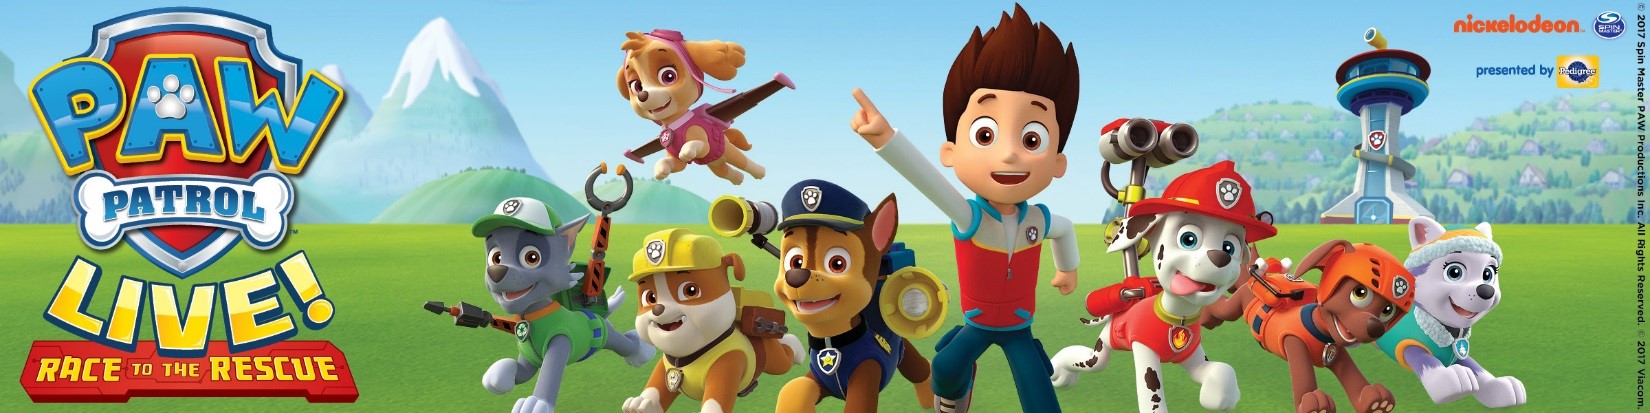 PAW Patrol Live! “Race to the.